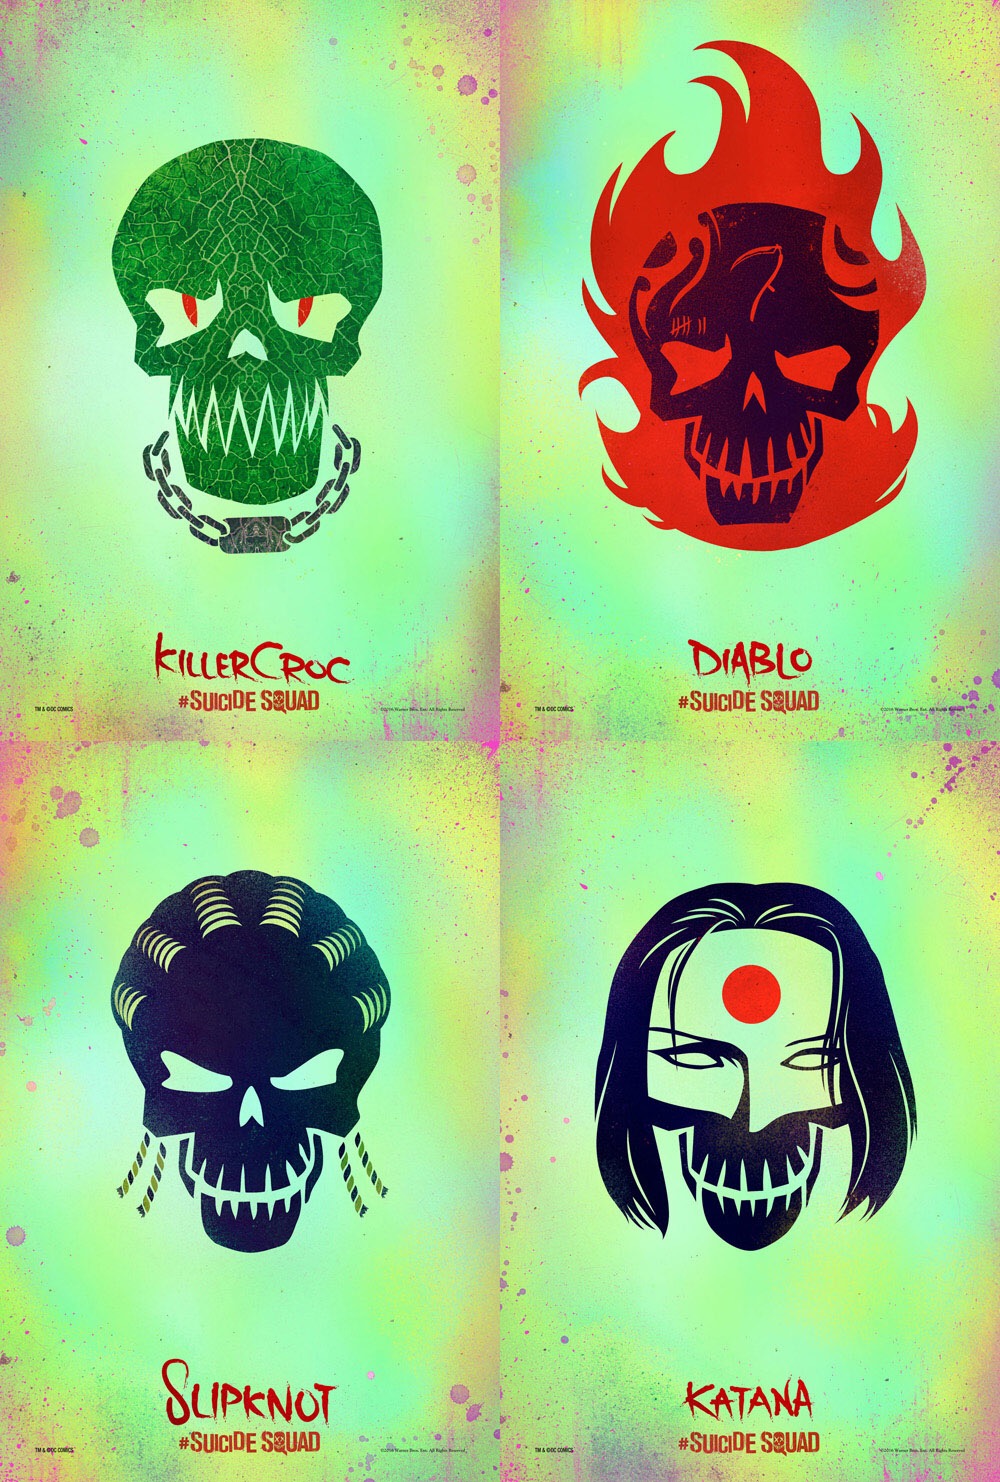 Character icon logos unveiled for Suicide Squad - Entertainment Focus